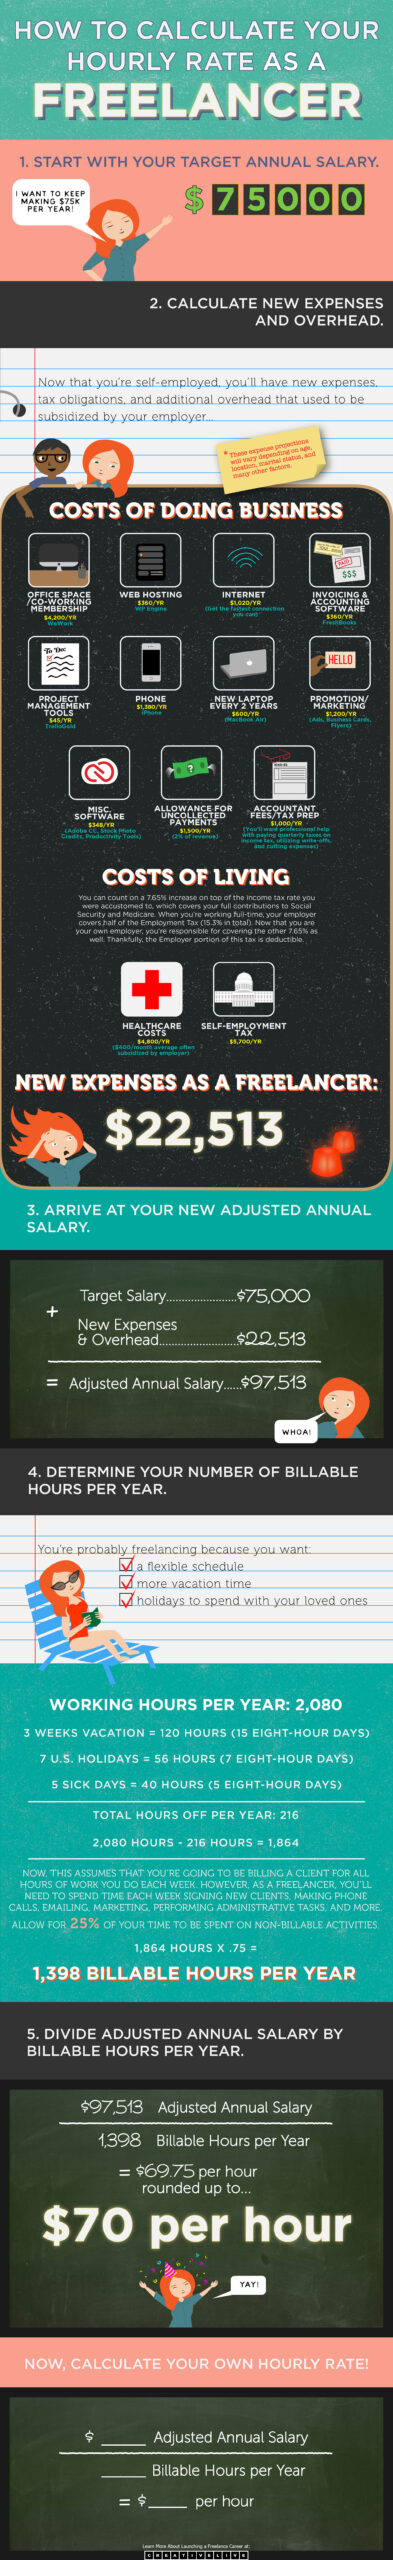 How-to-Calculate-Your-Freelance-Hourly-Rate-Infographic-by-CreativeLive-Final